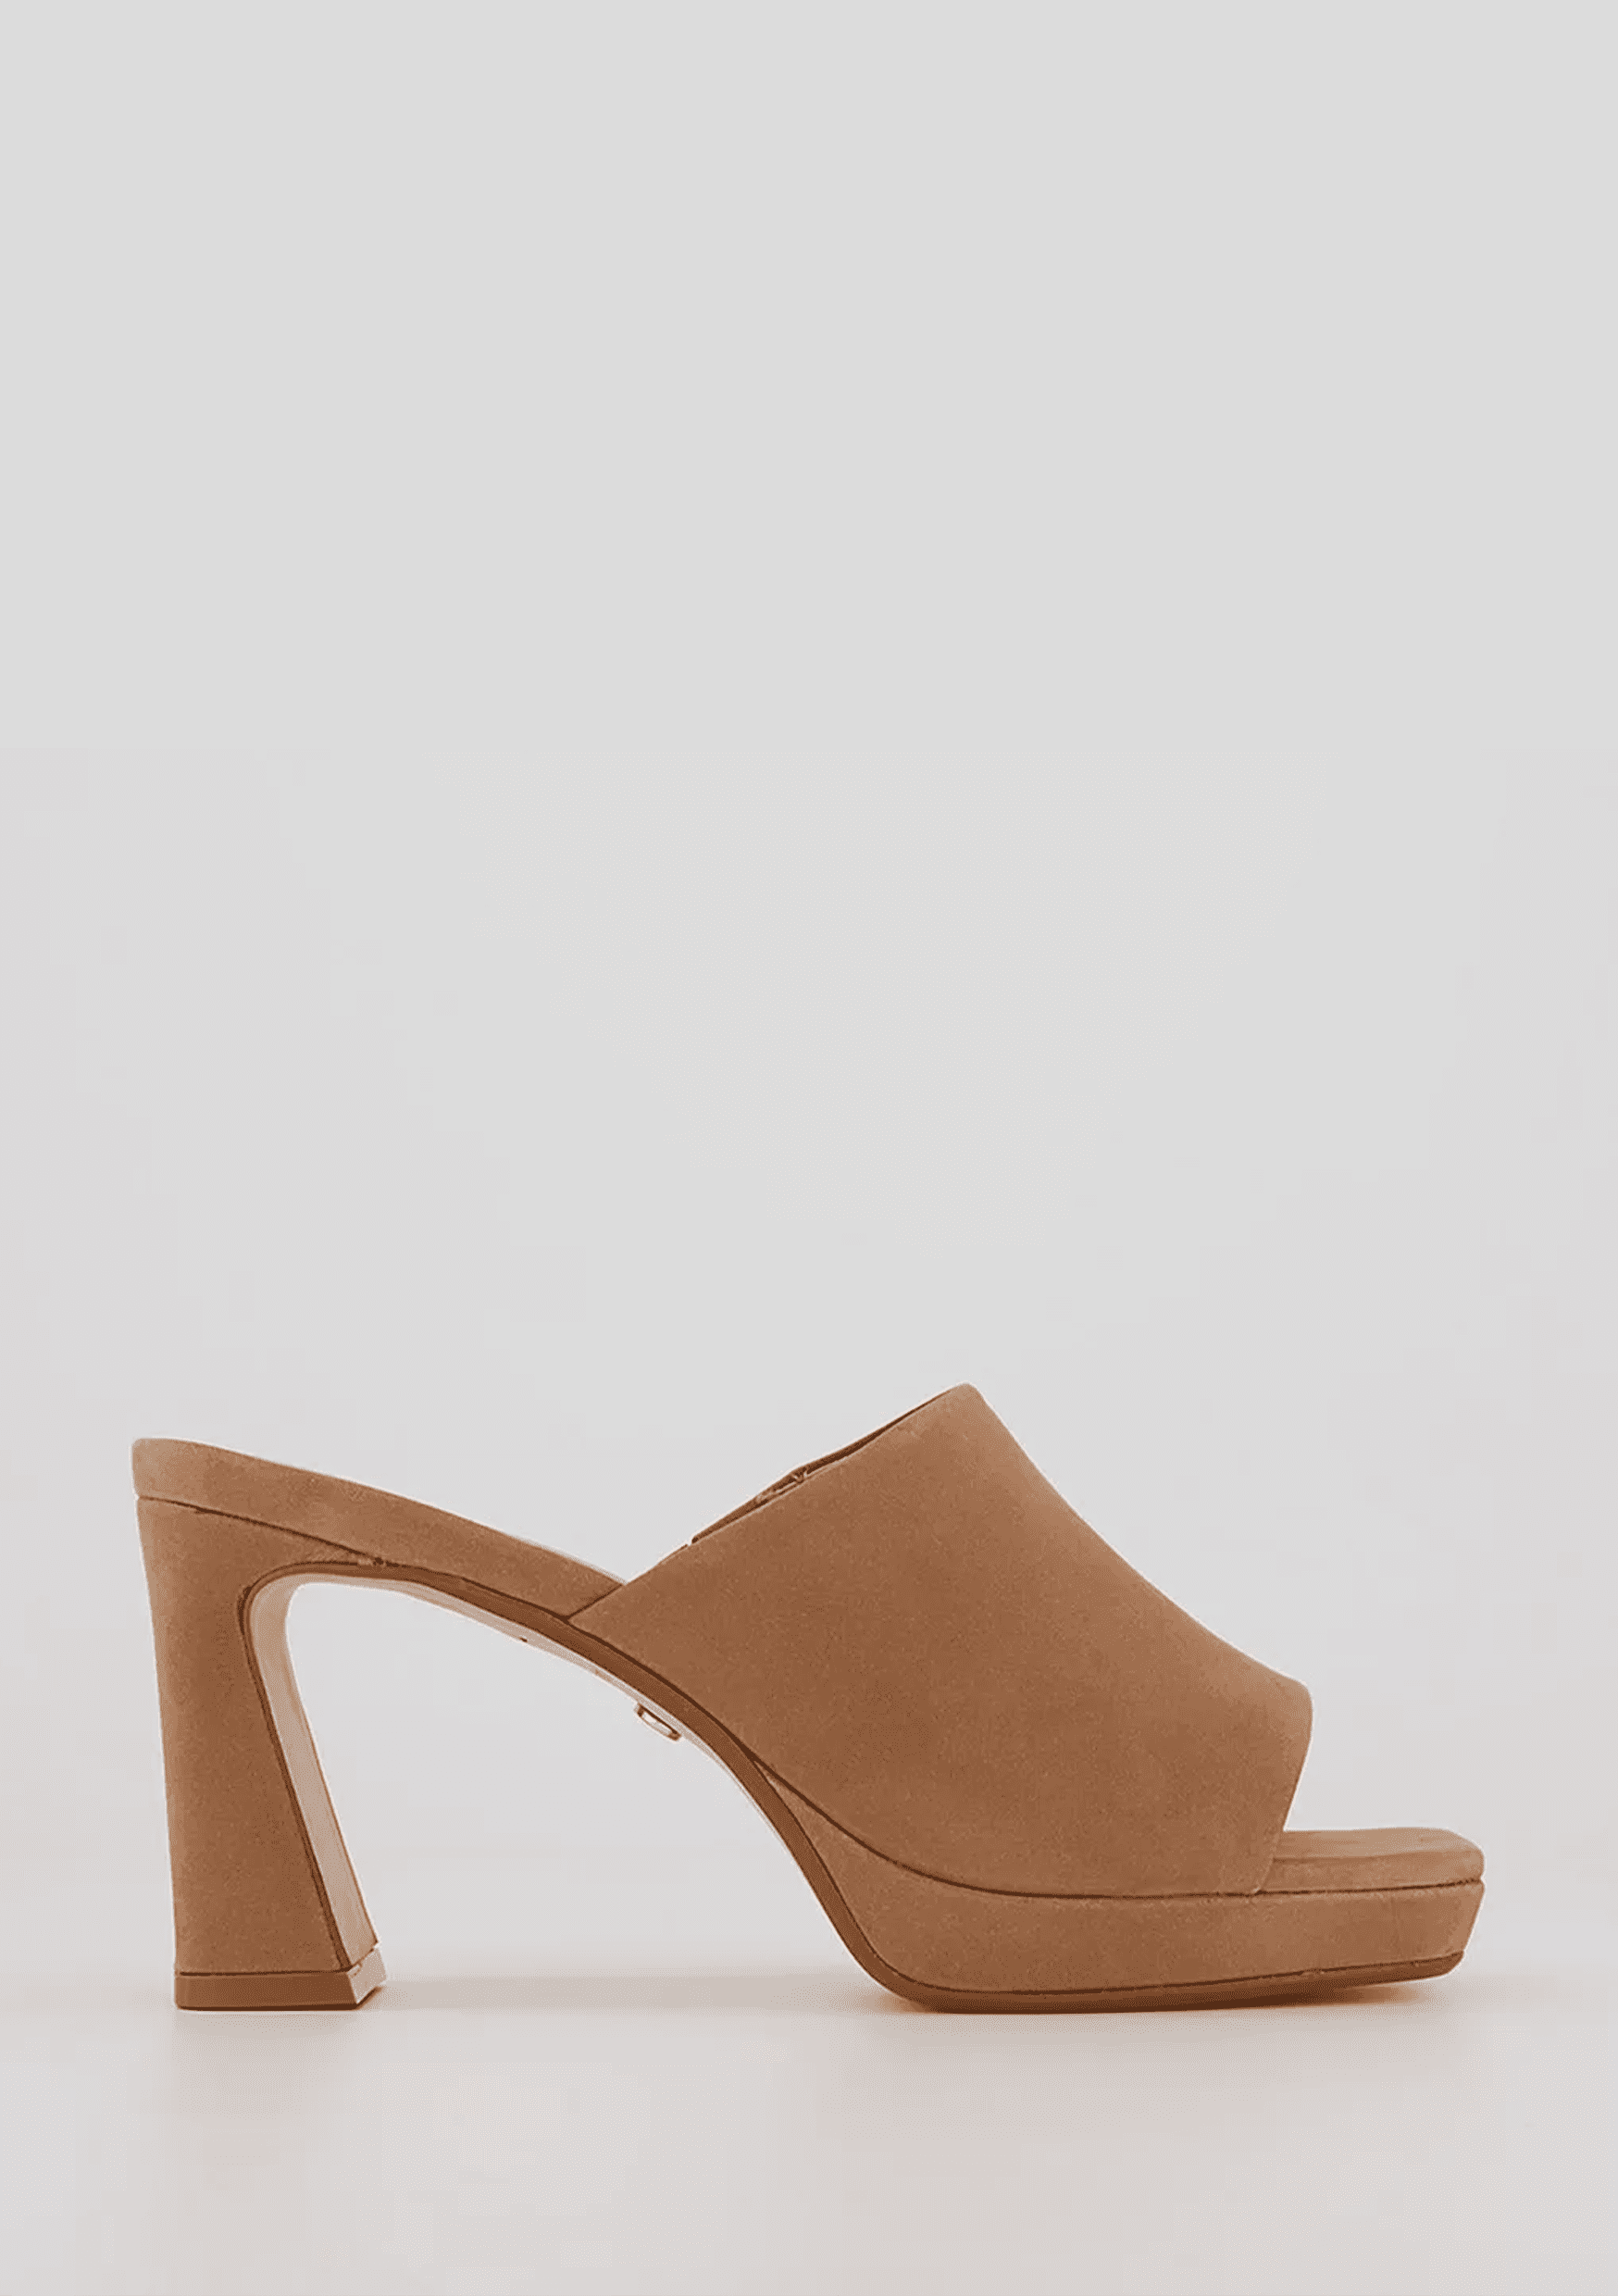 Heel The World Women's Pumps,Low Chunky Block Heels,Square Toe Patent Women  Dress Shoes for Party Office, Nude, 11: Buy Online at Best Price in UAE -  Amazon.ae